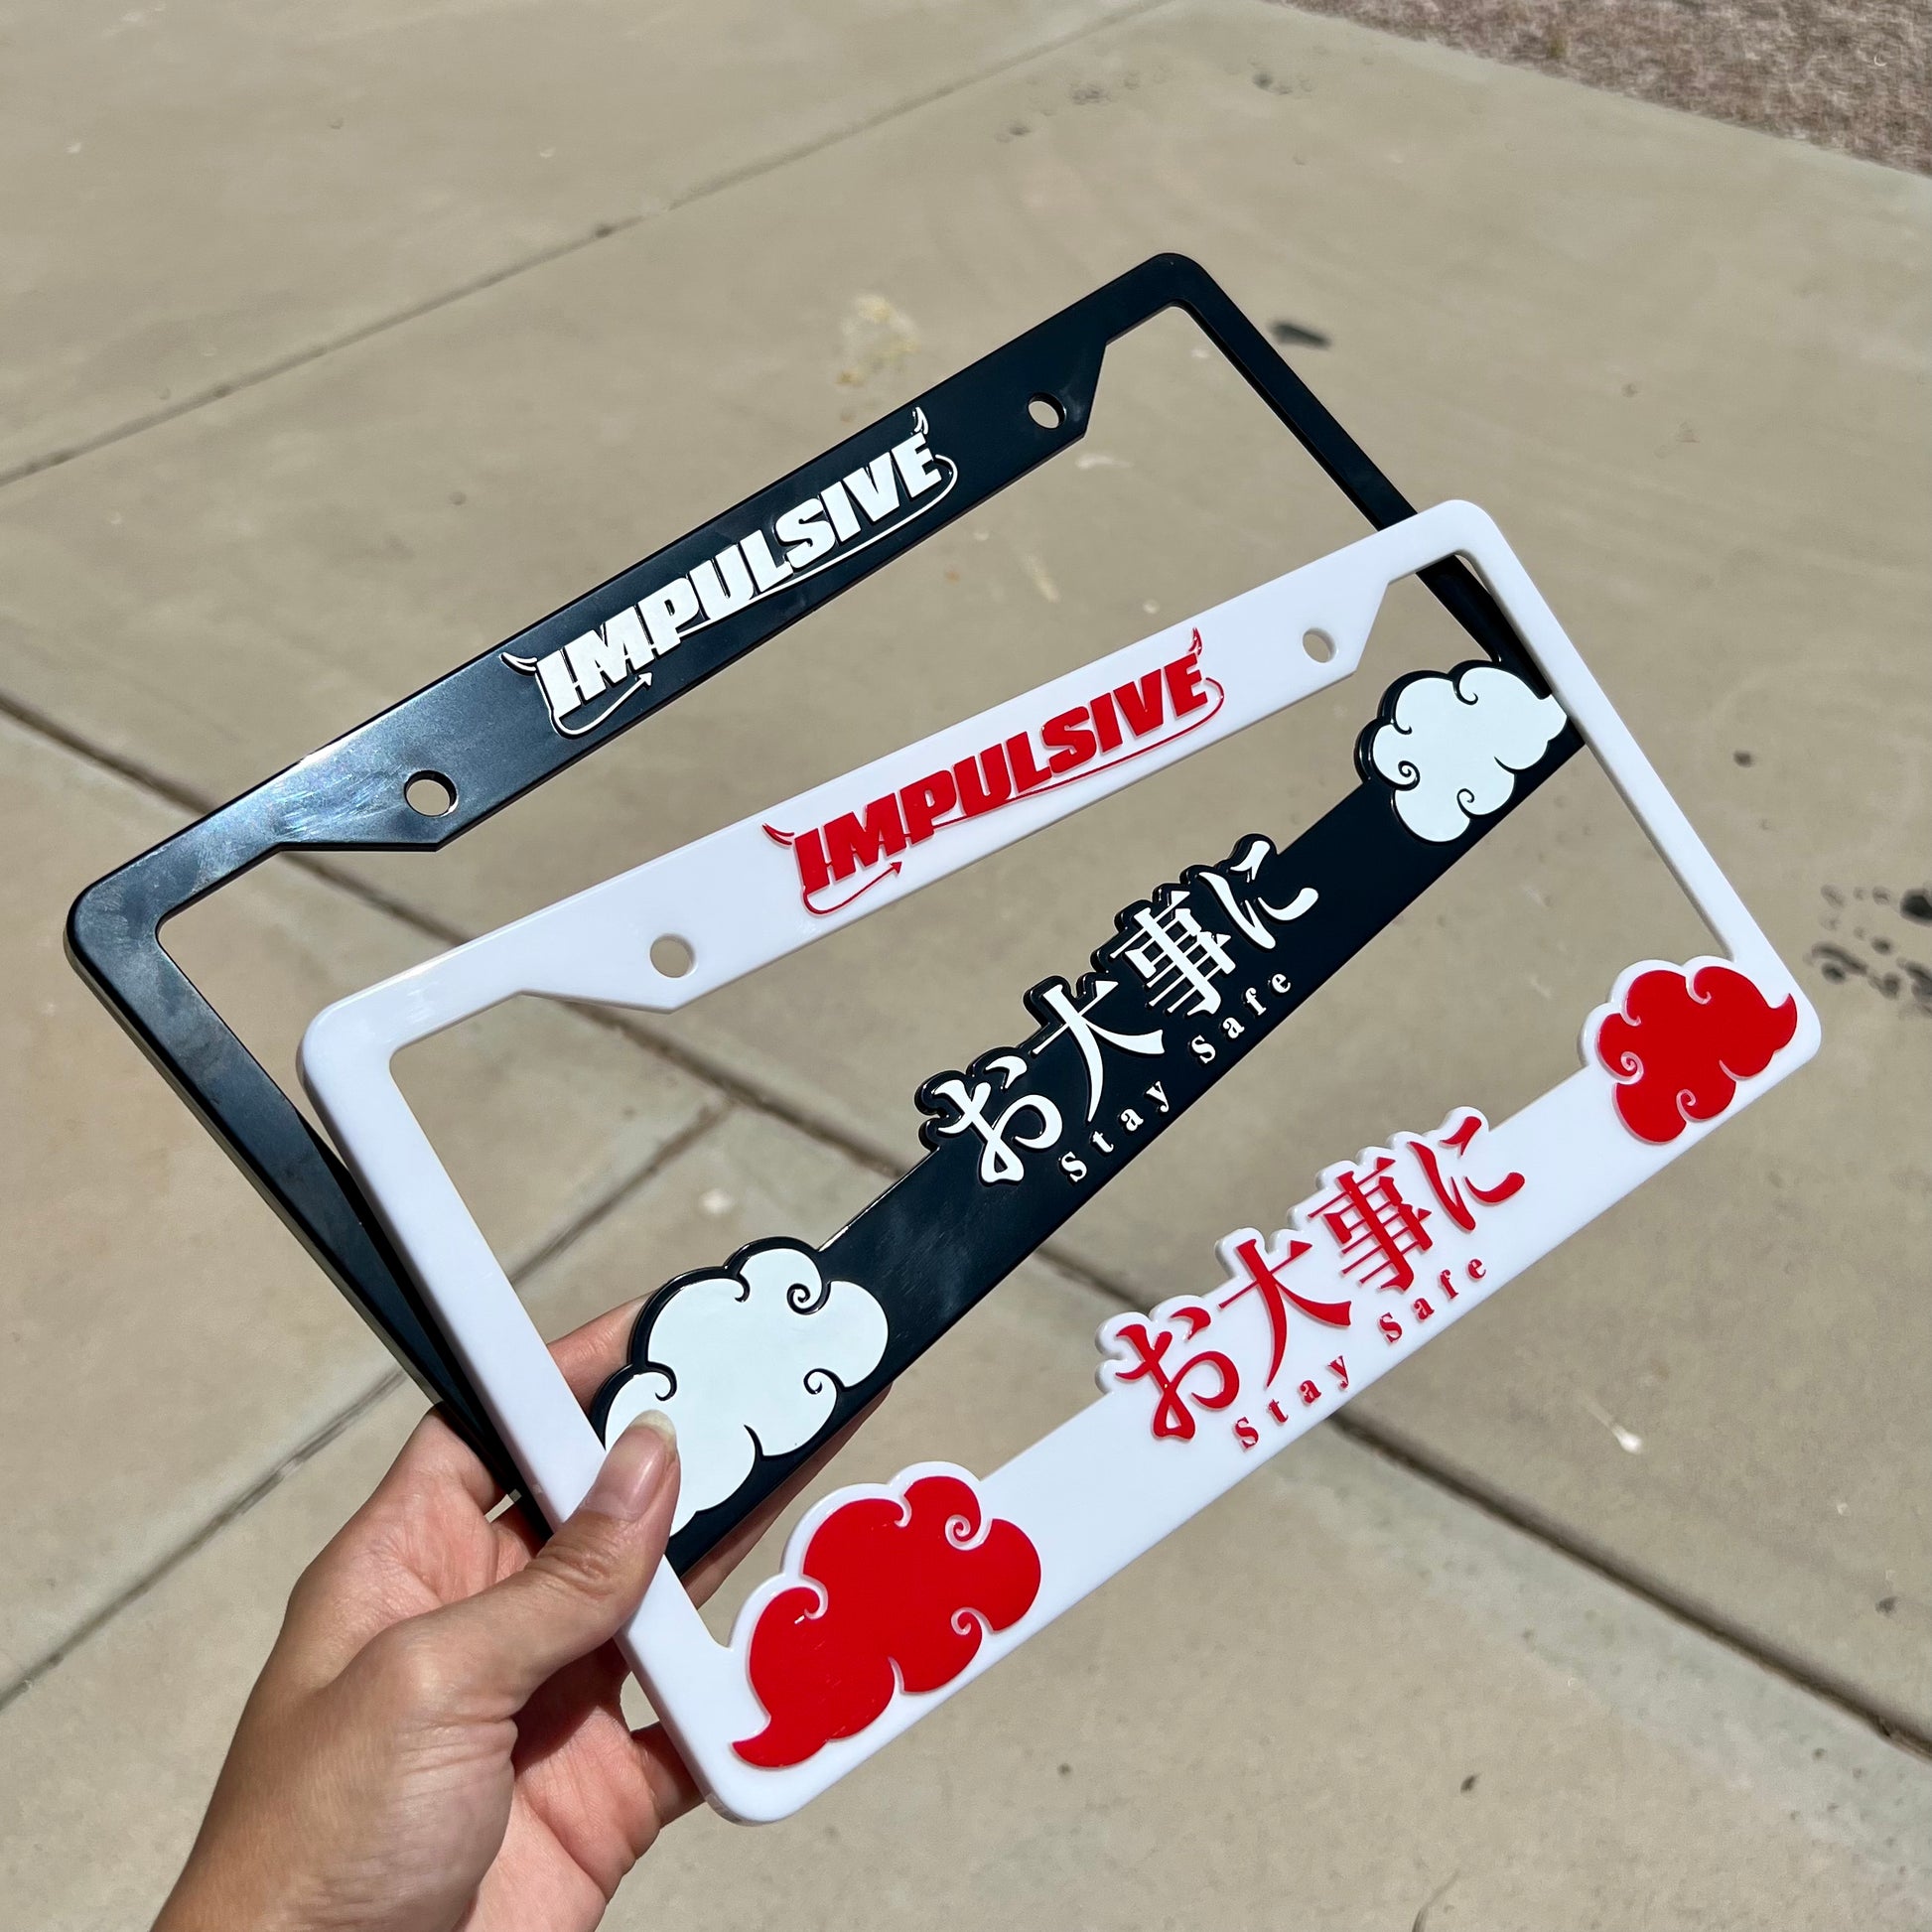 Japanese anime inspired plastic custom License Plate Frame. Top has Impulsive logo and the bottom has japanese characters and english translated to stay safe surrounding with japanese clouds. Asian inspired. Black Frame with White lettering and white frame with red lettering.